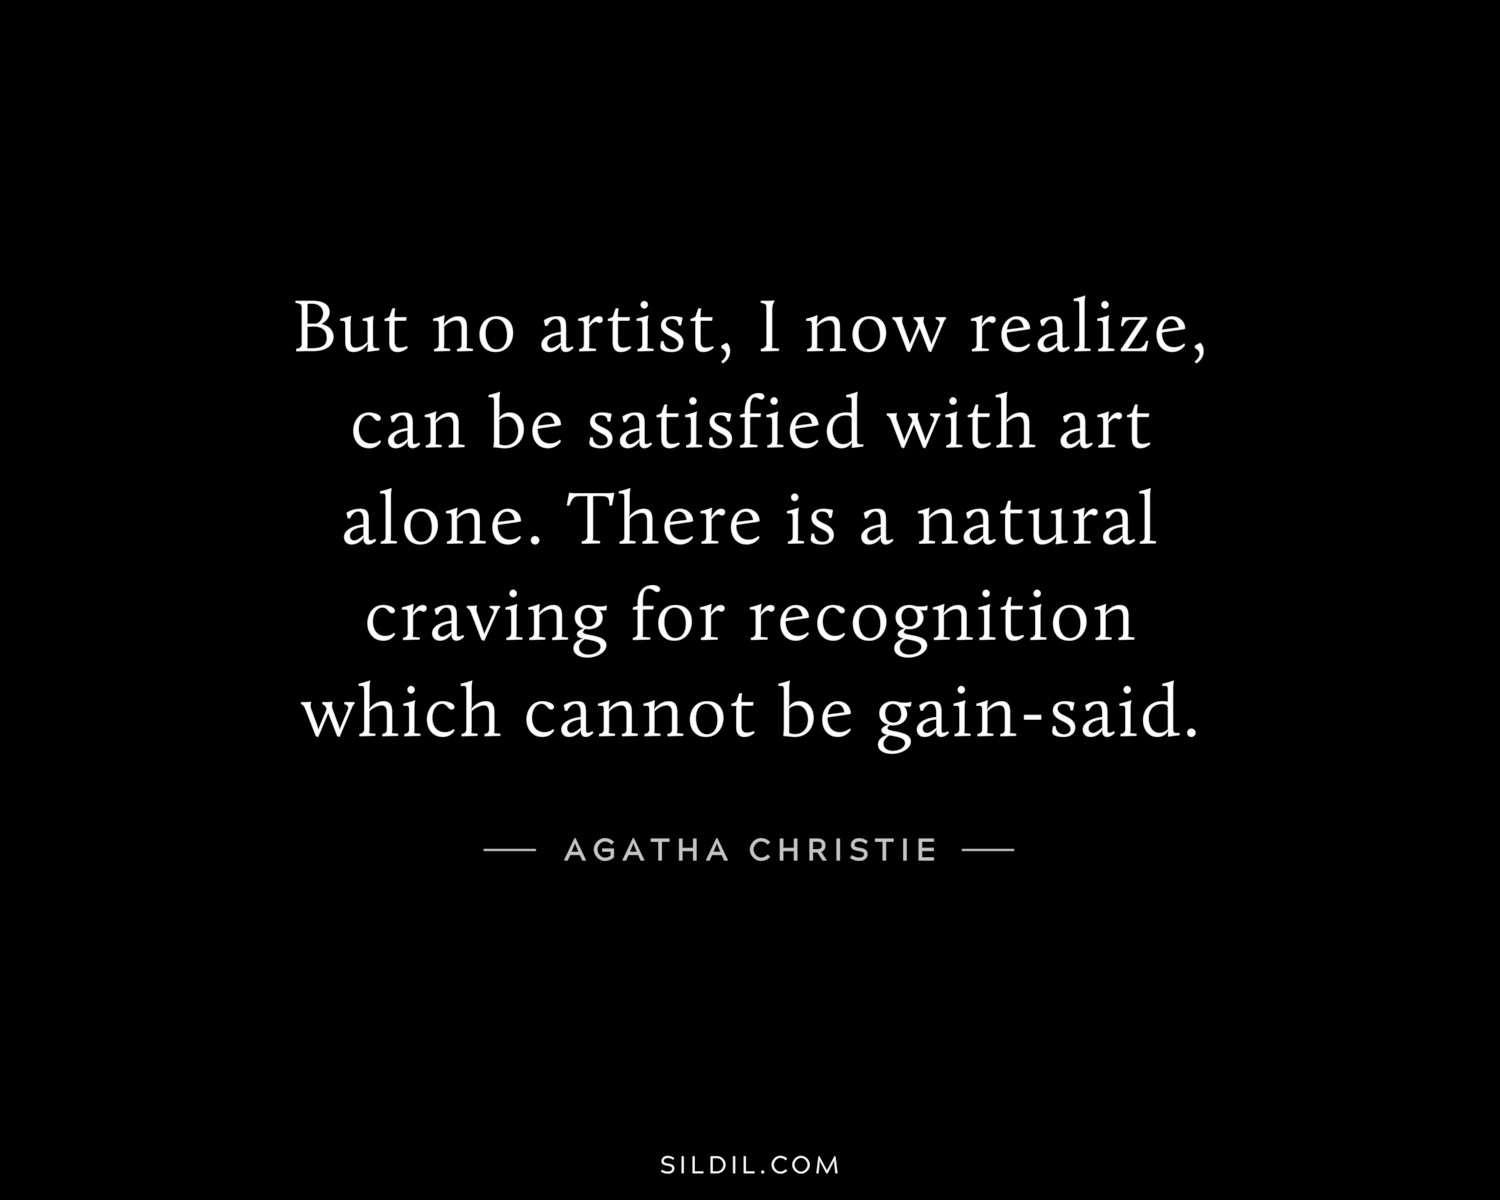 But no artist, I now realize, can be satisfied with art alone. There is a natural craving for recognition which cannot be gain-said.